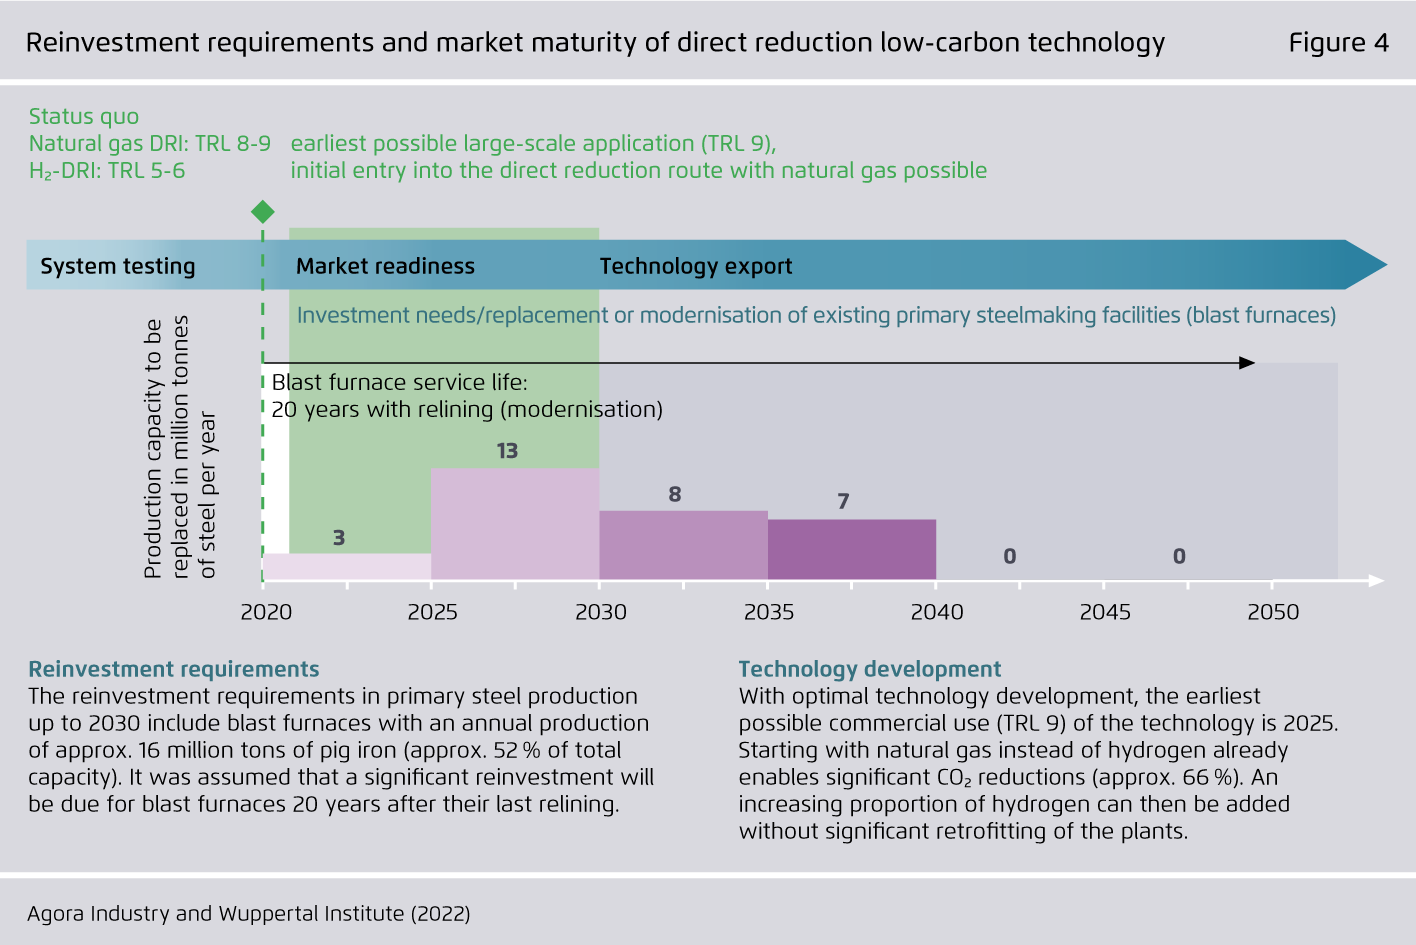 Preview for Reinvestment requirements and market maturity of direct reduction low-carbon technology